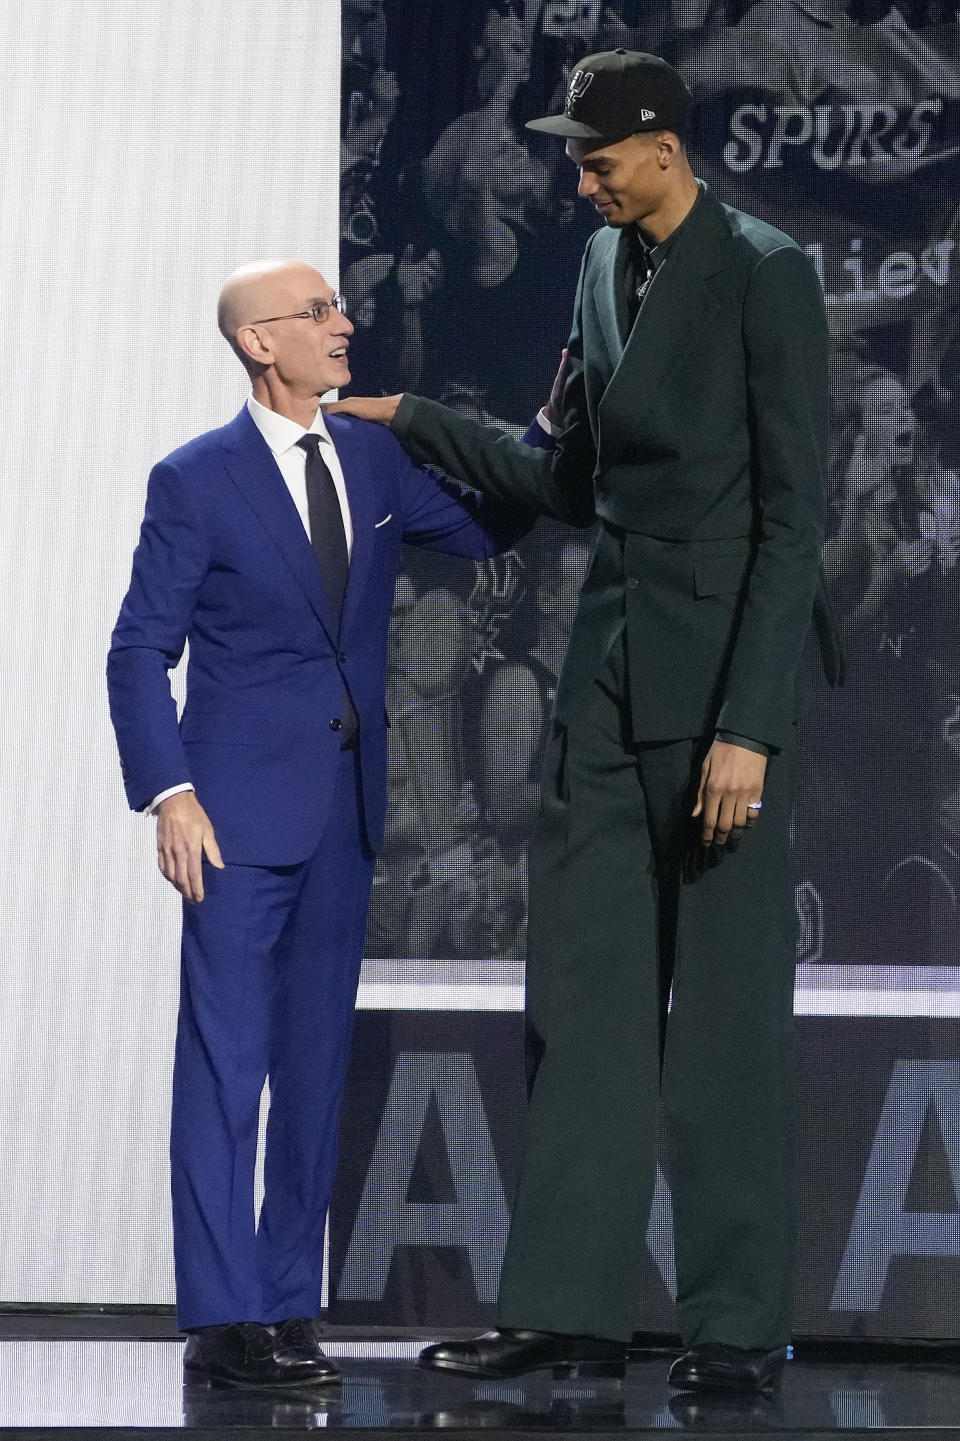 Victor Wembanyama is greeted by NBA commissioner Adam Silver after being selected first overall by the San Antonio Spurs during the NBA basketball draft, Thursday, June 22, 2023, in New York. (AP Photo/John Minchillo)